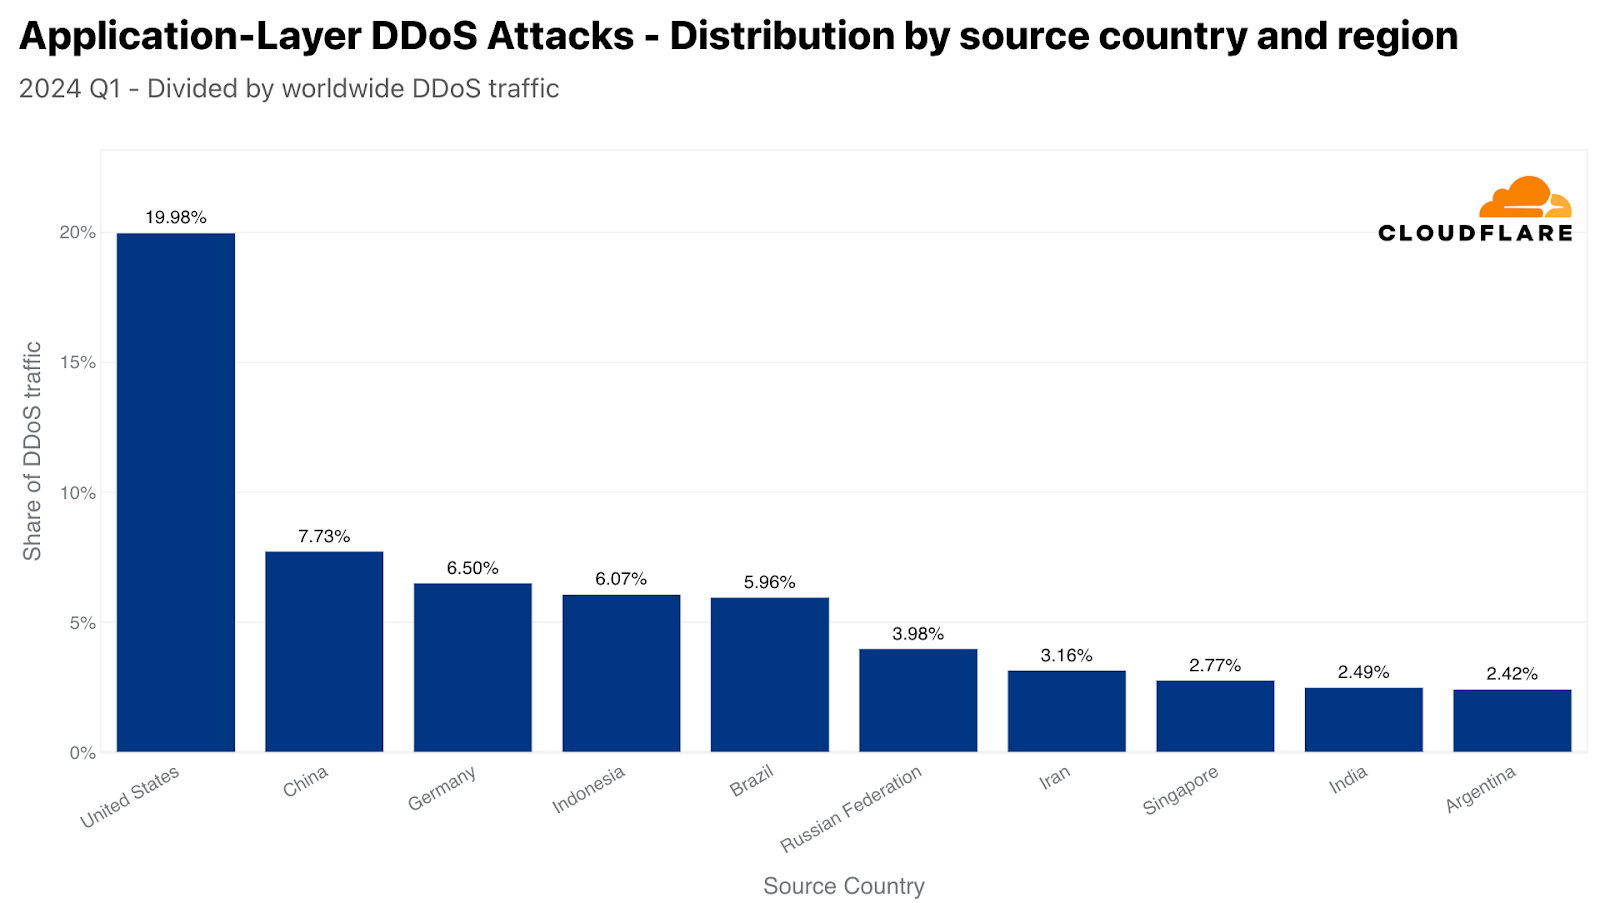 The top sources of HTTP DDoS attacks